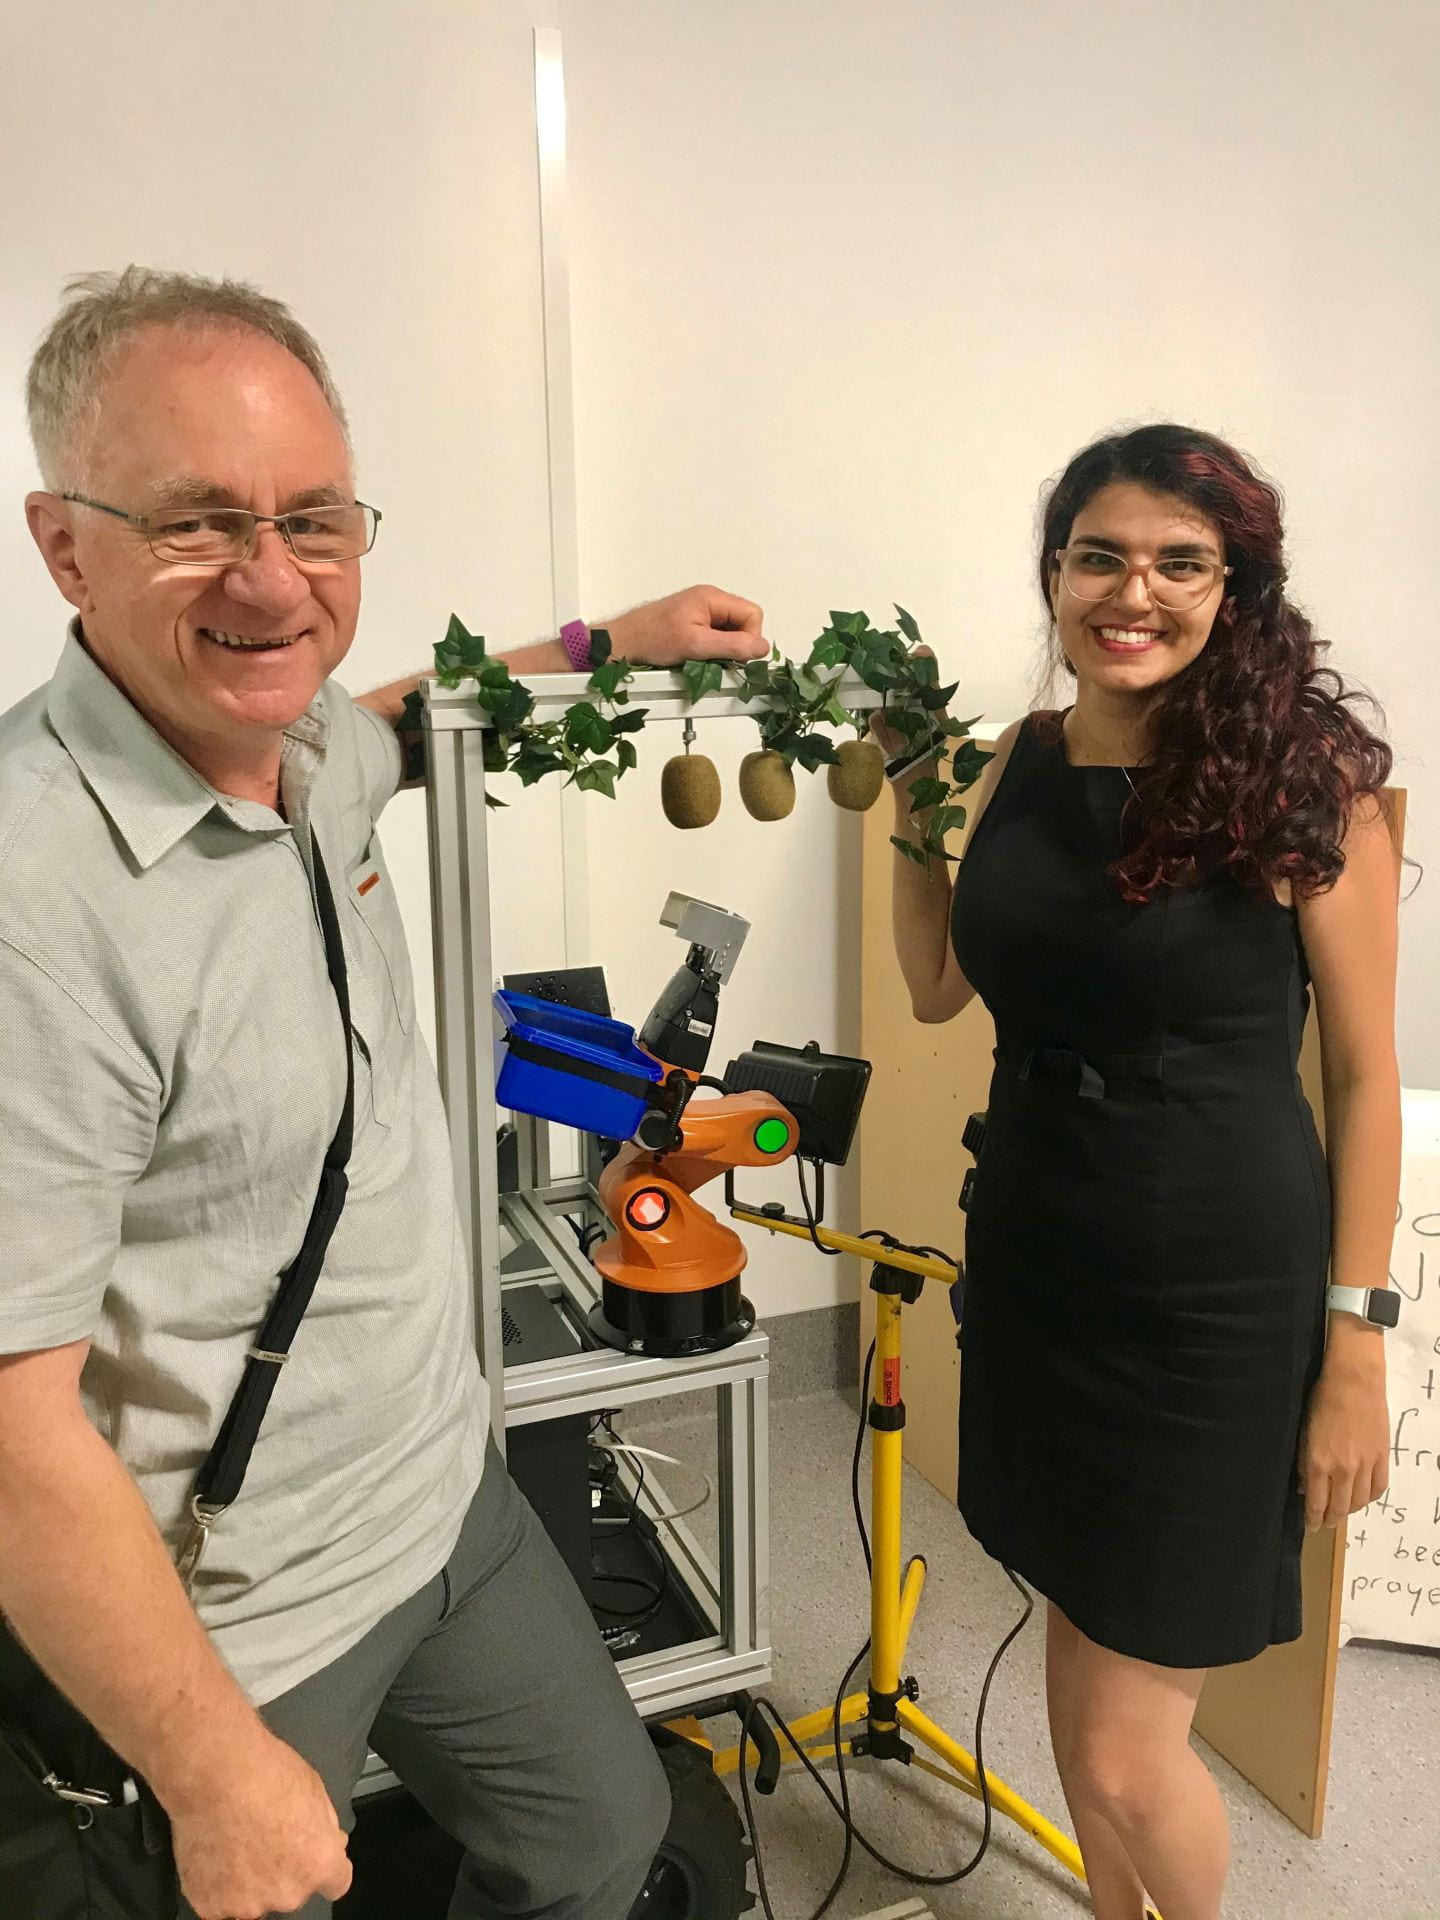 Prof Bruce MacDonald (left) and Dr Mahla Nejati (right) stand by a kiwifruit picking robot